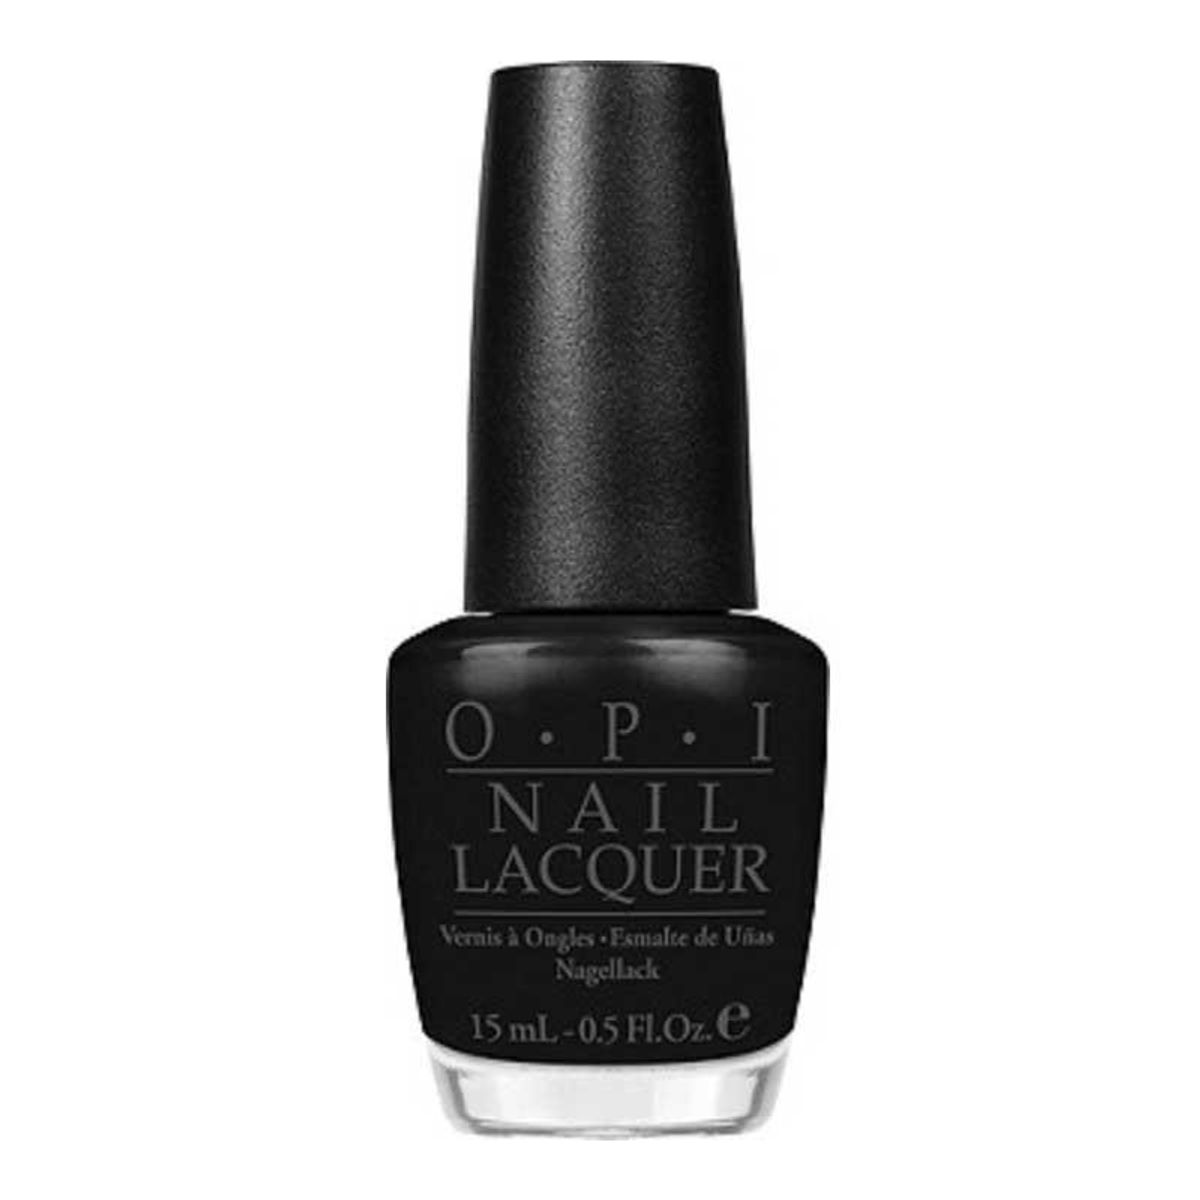 opi nail lacquer in black onyx